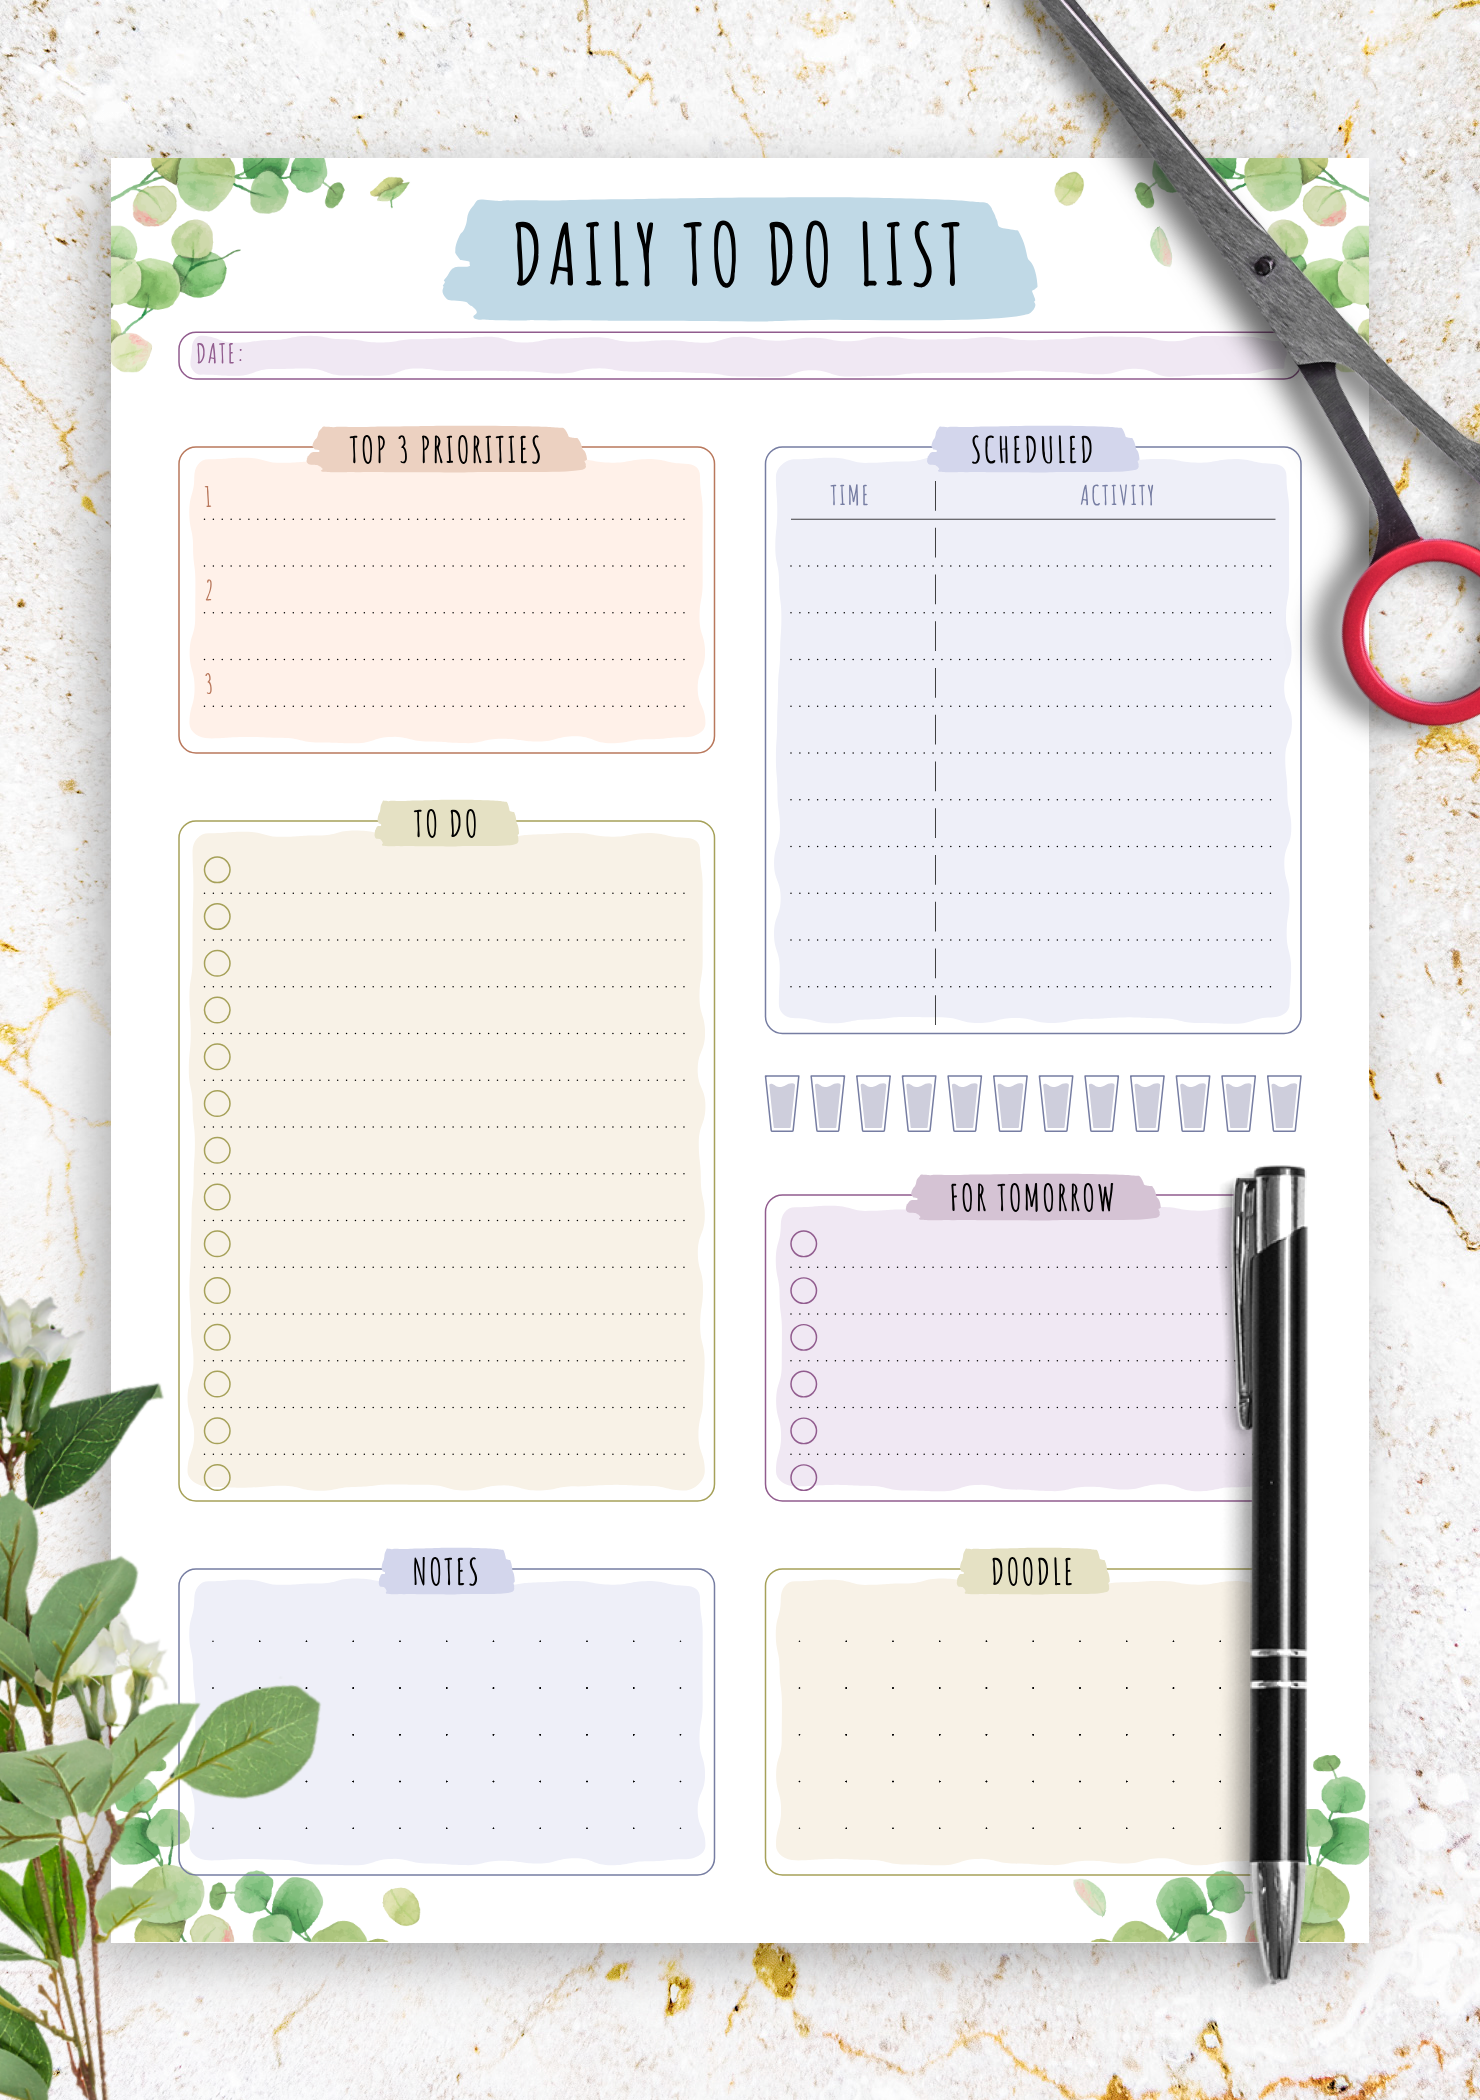 Download Printable Scheduled Daily To Do List Floral Style PDF